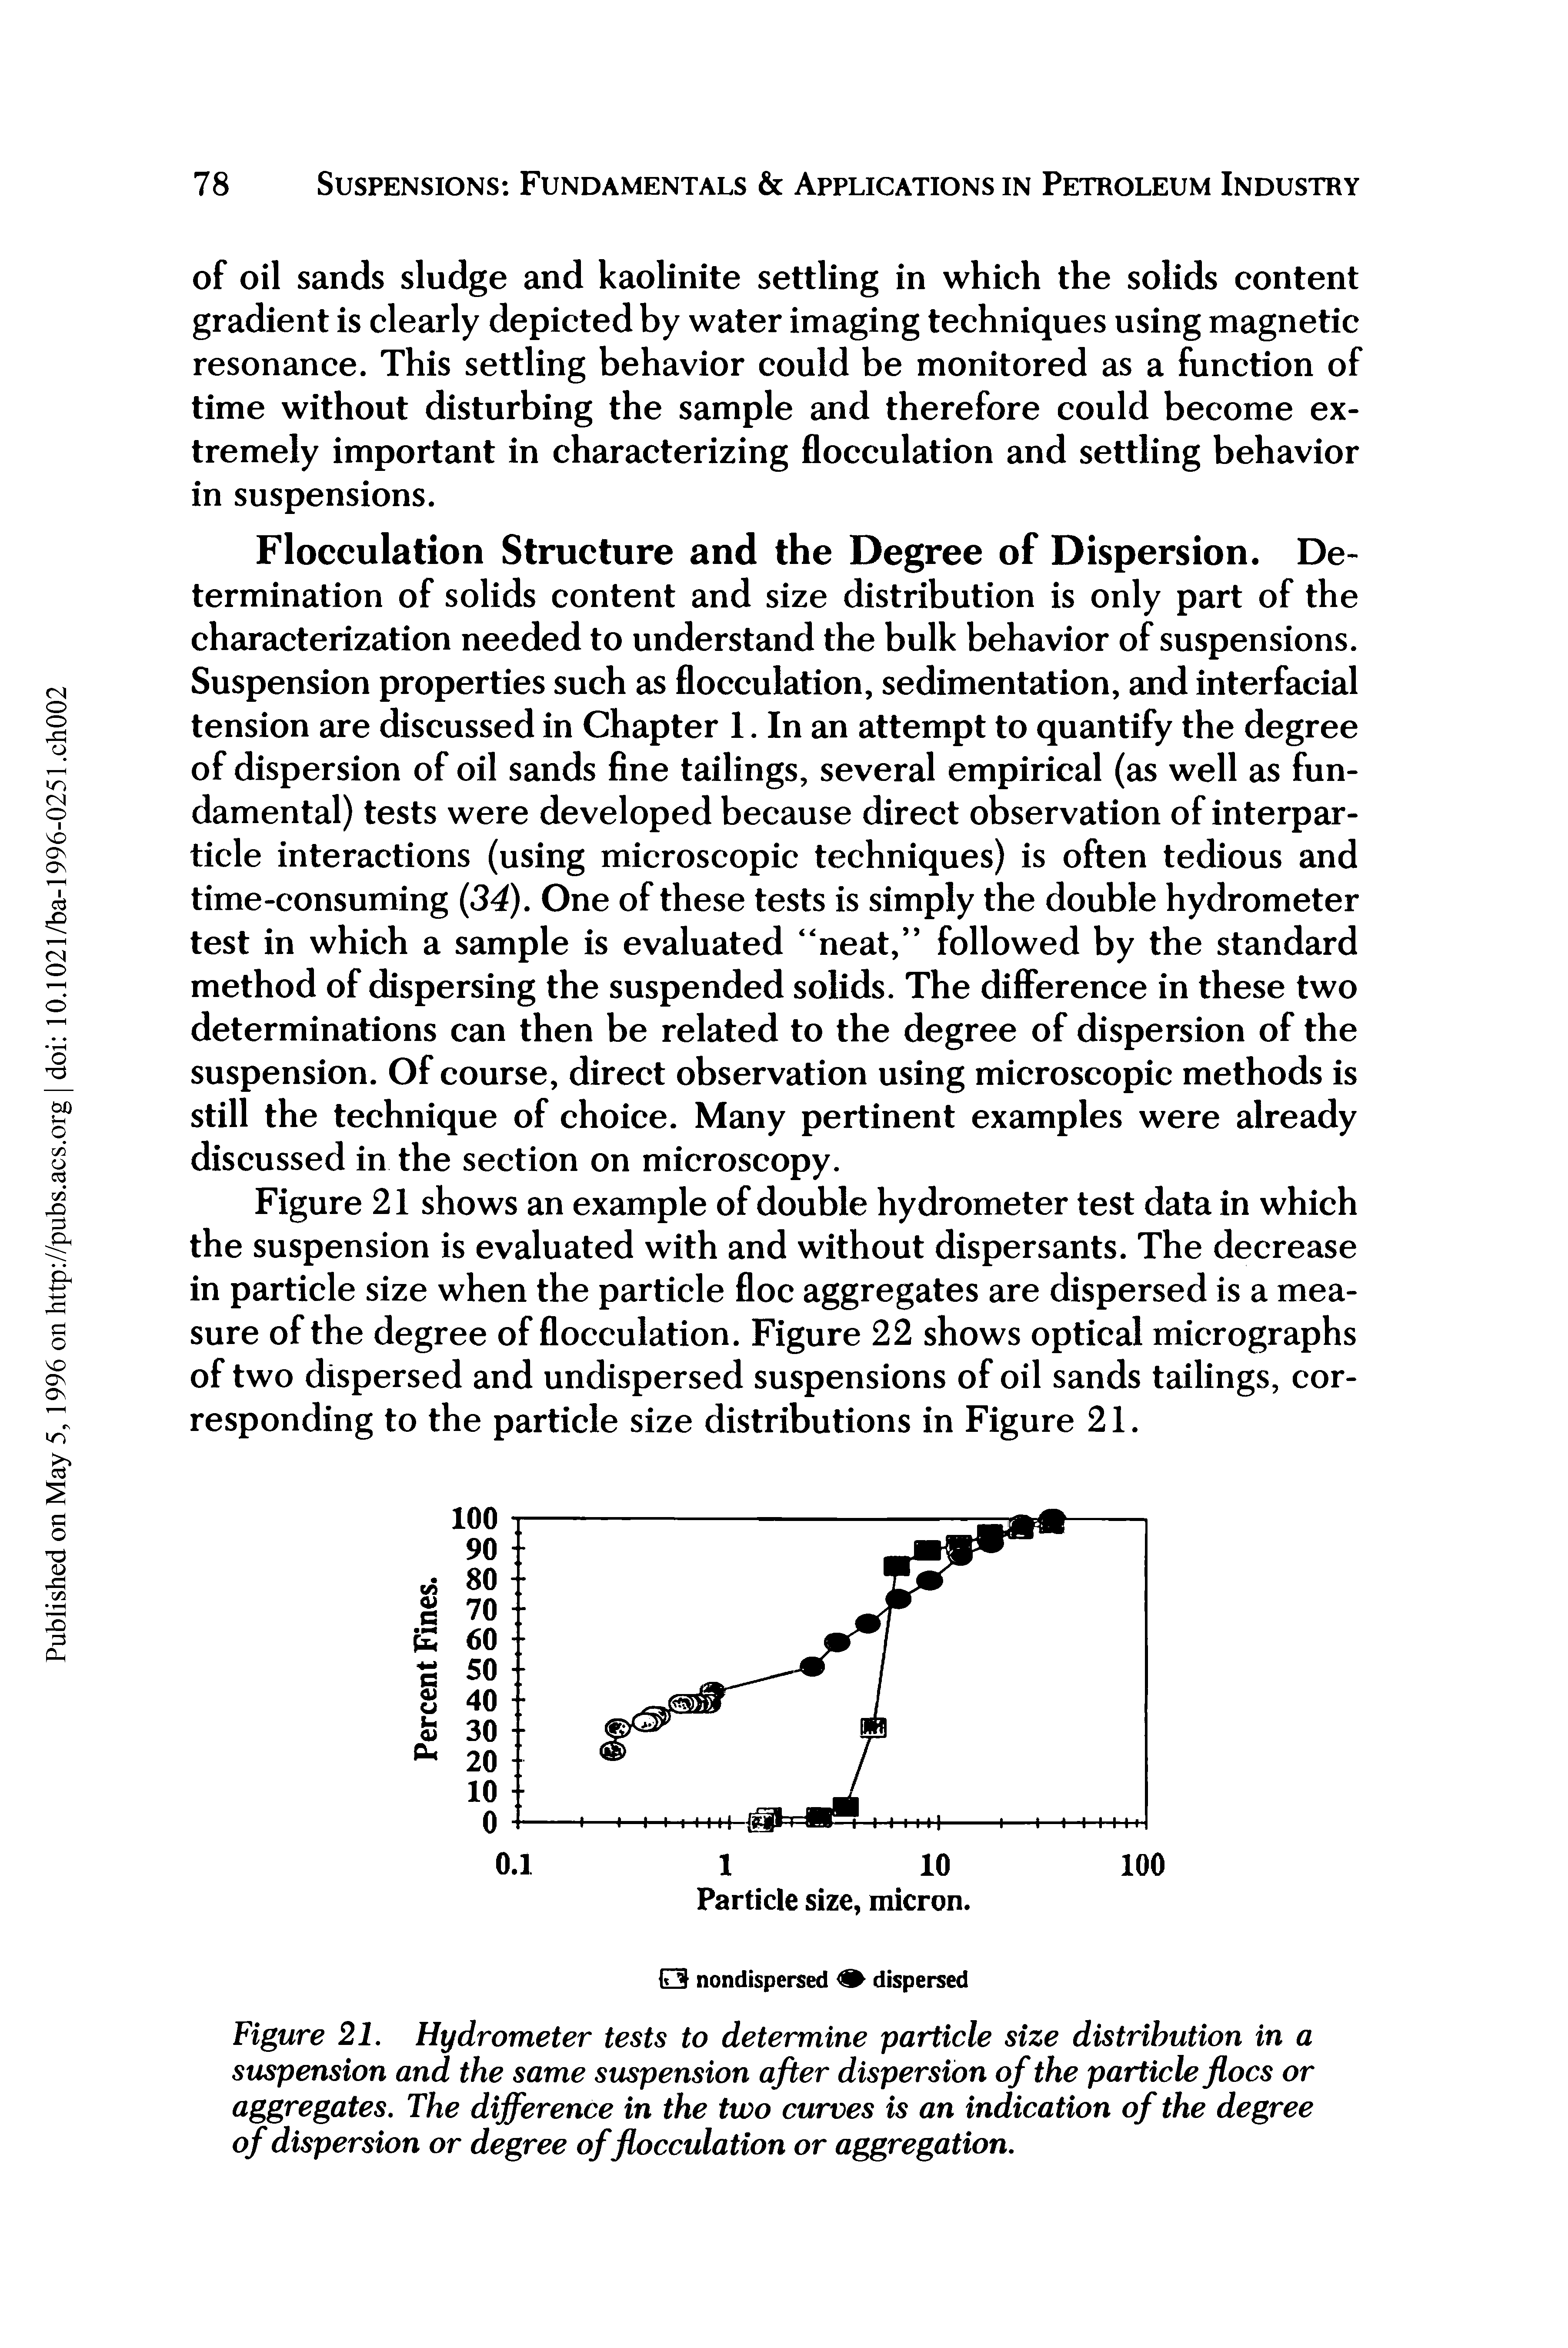 Figure 21. Hydrometer tests to determine particle size distribution in a suspension and the same suspension after dispersion of the particle floes or aggregates. The difference in the two curves is an indication of the degree of dispersion or degree of flocculation or aggregation.